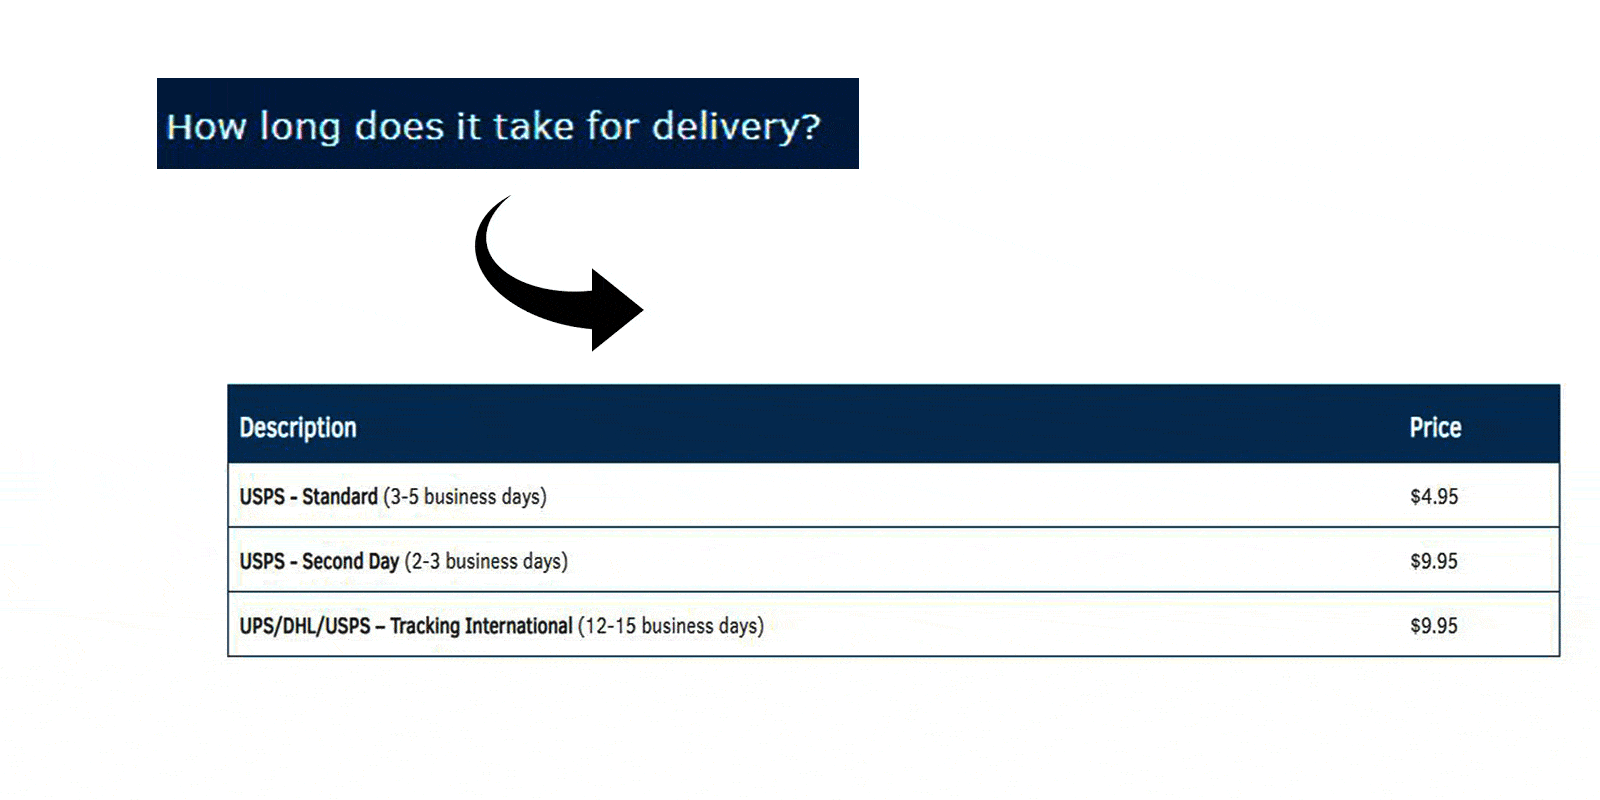 Lutenol-delivery time